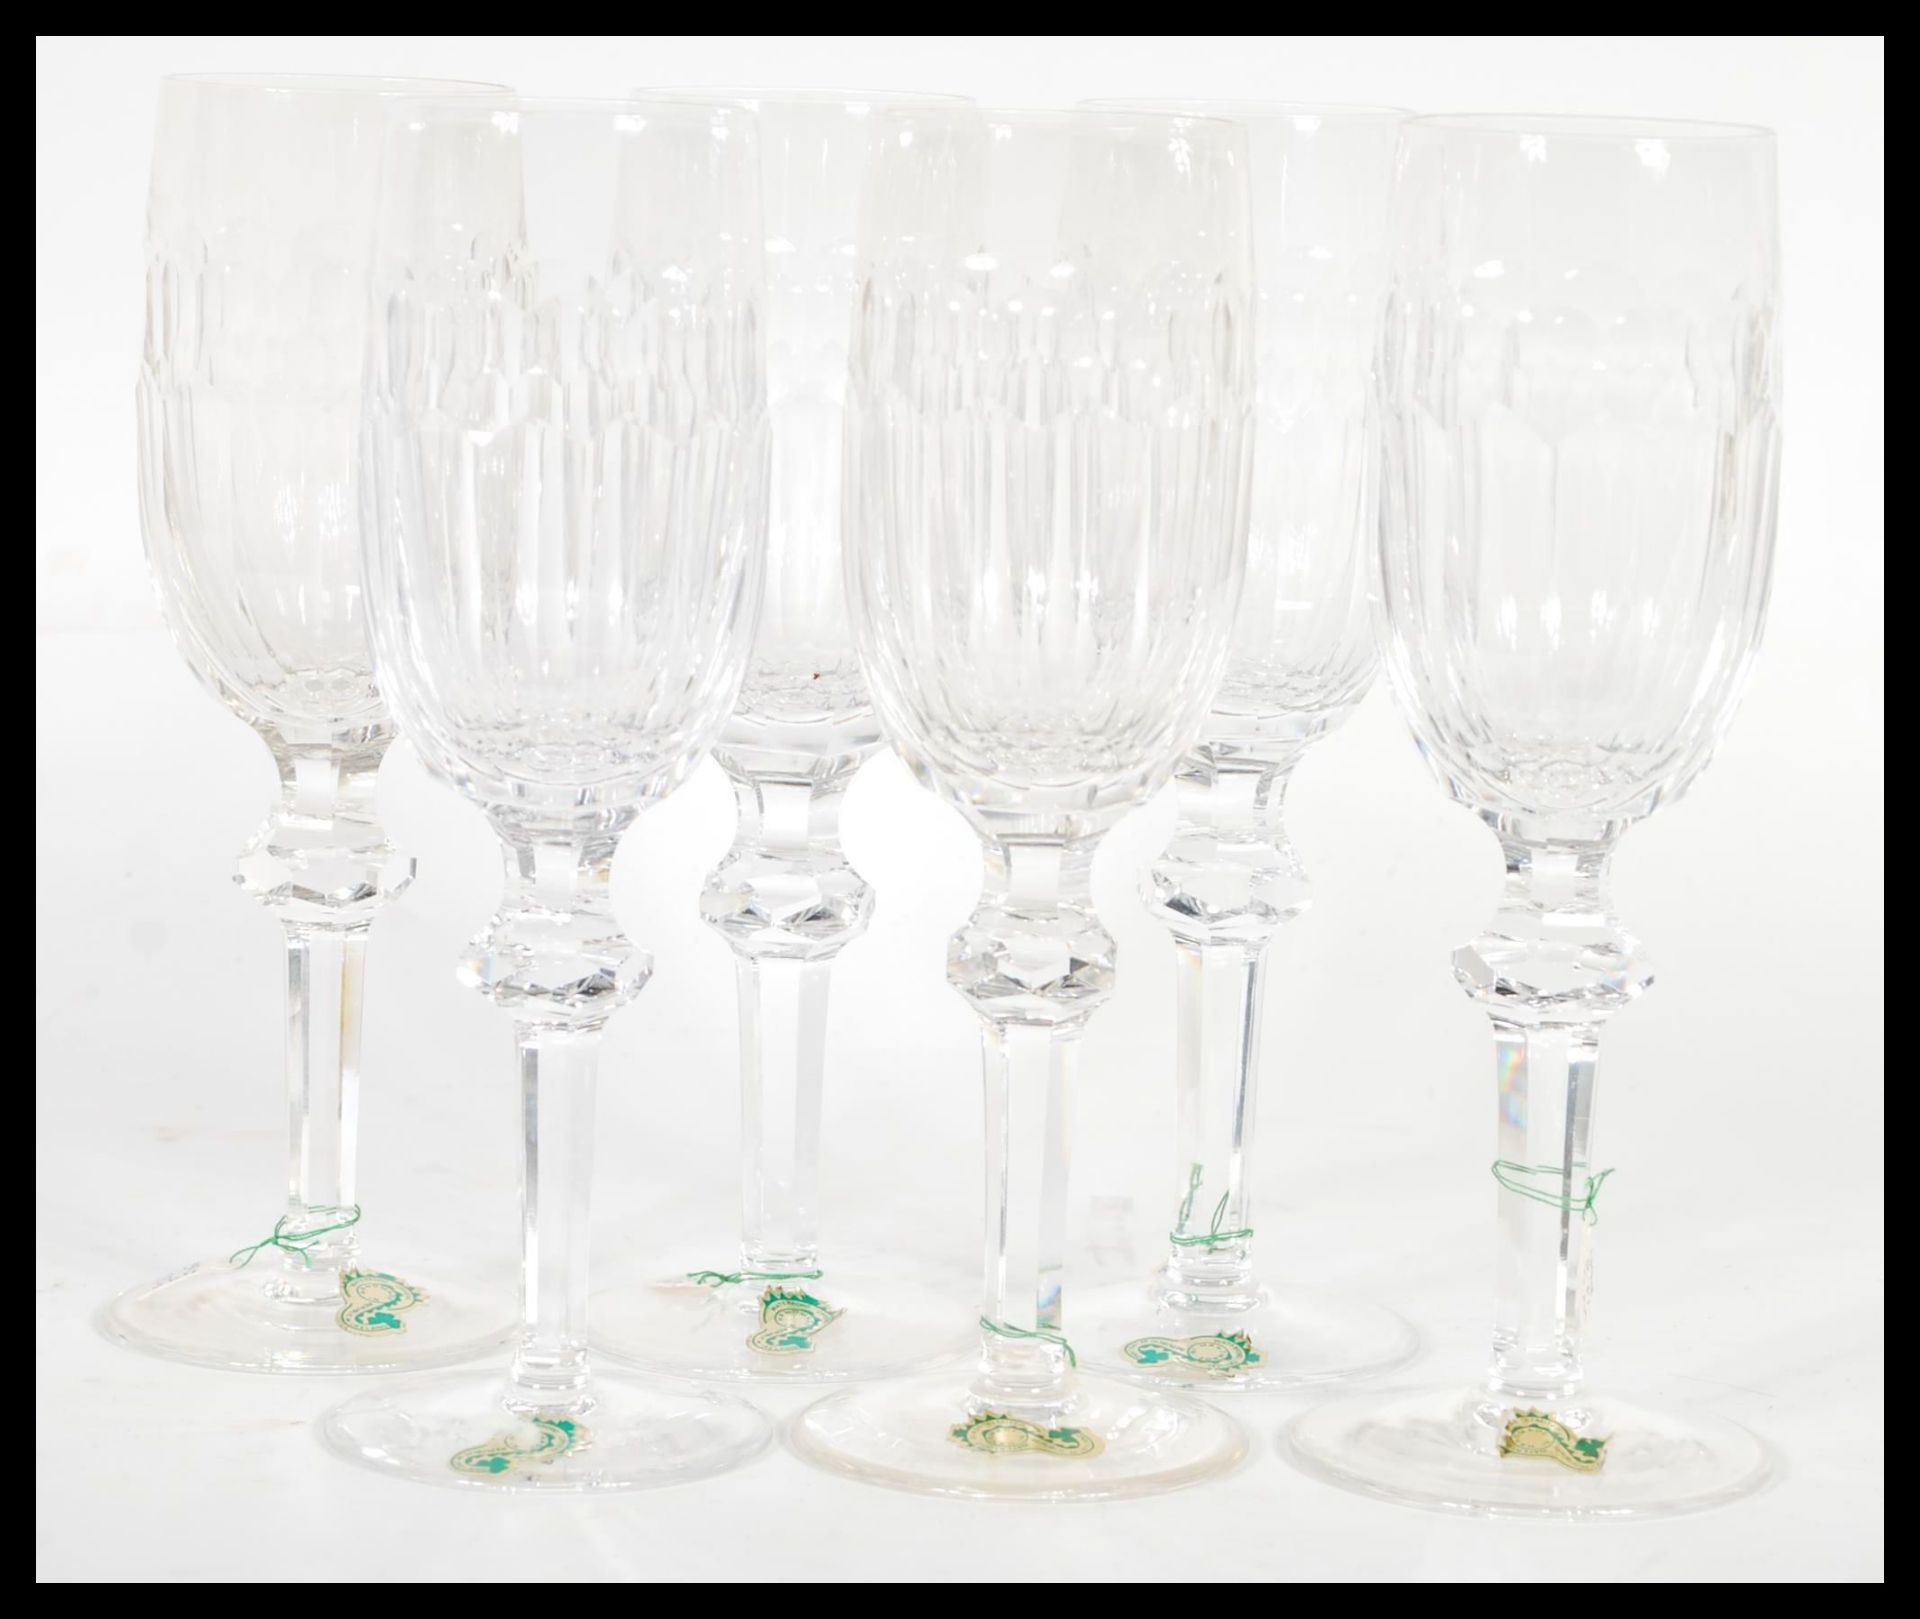 A set of 6 Irish Waterford crystal wine glasses. Facet cut stems with deep bowls all having the